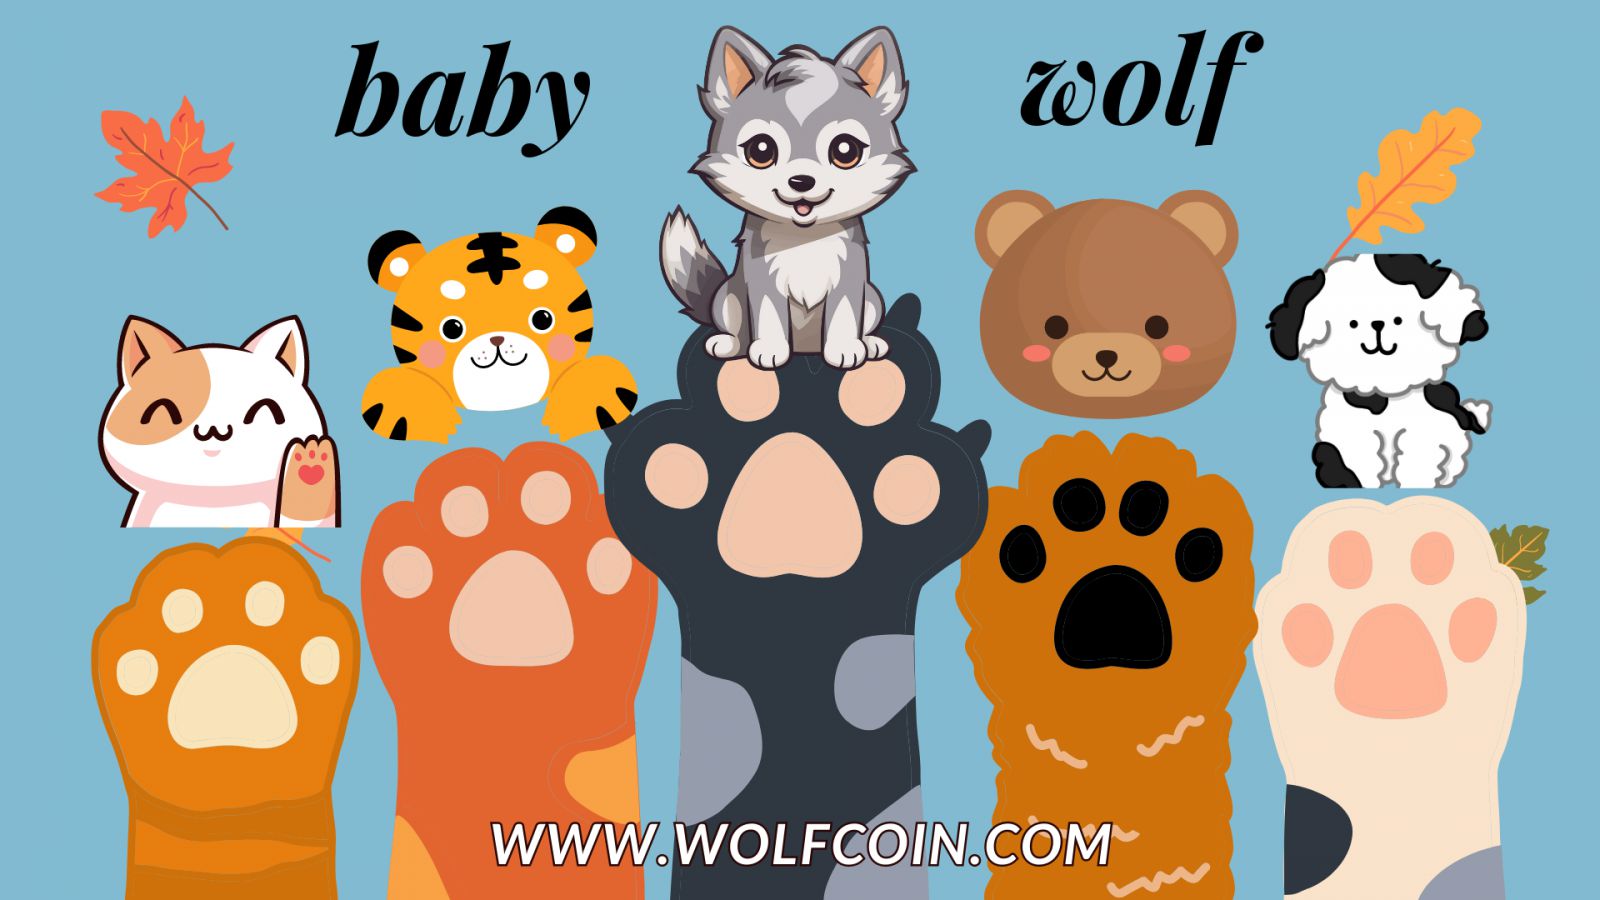 baby wolf (wolfcoin).png.jpg